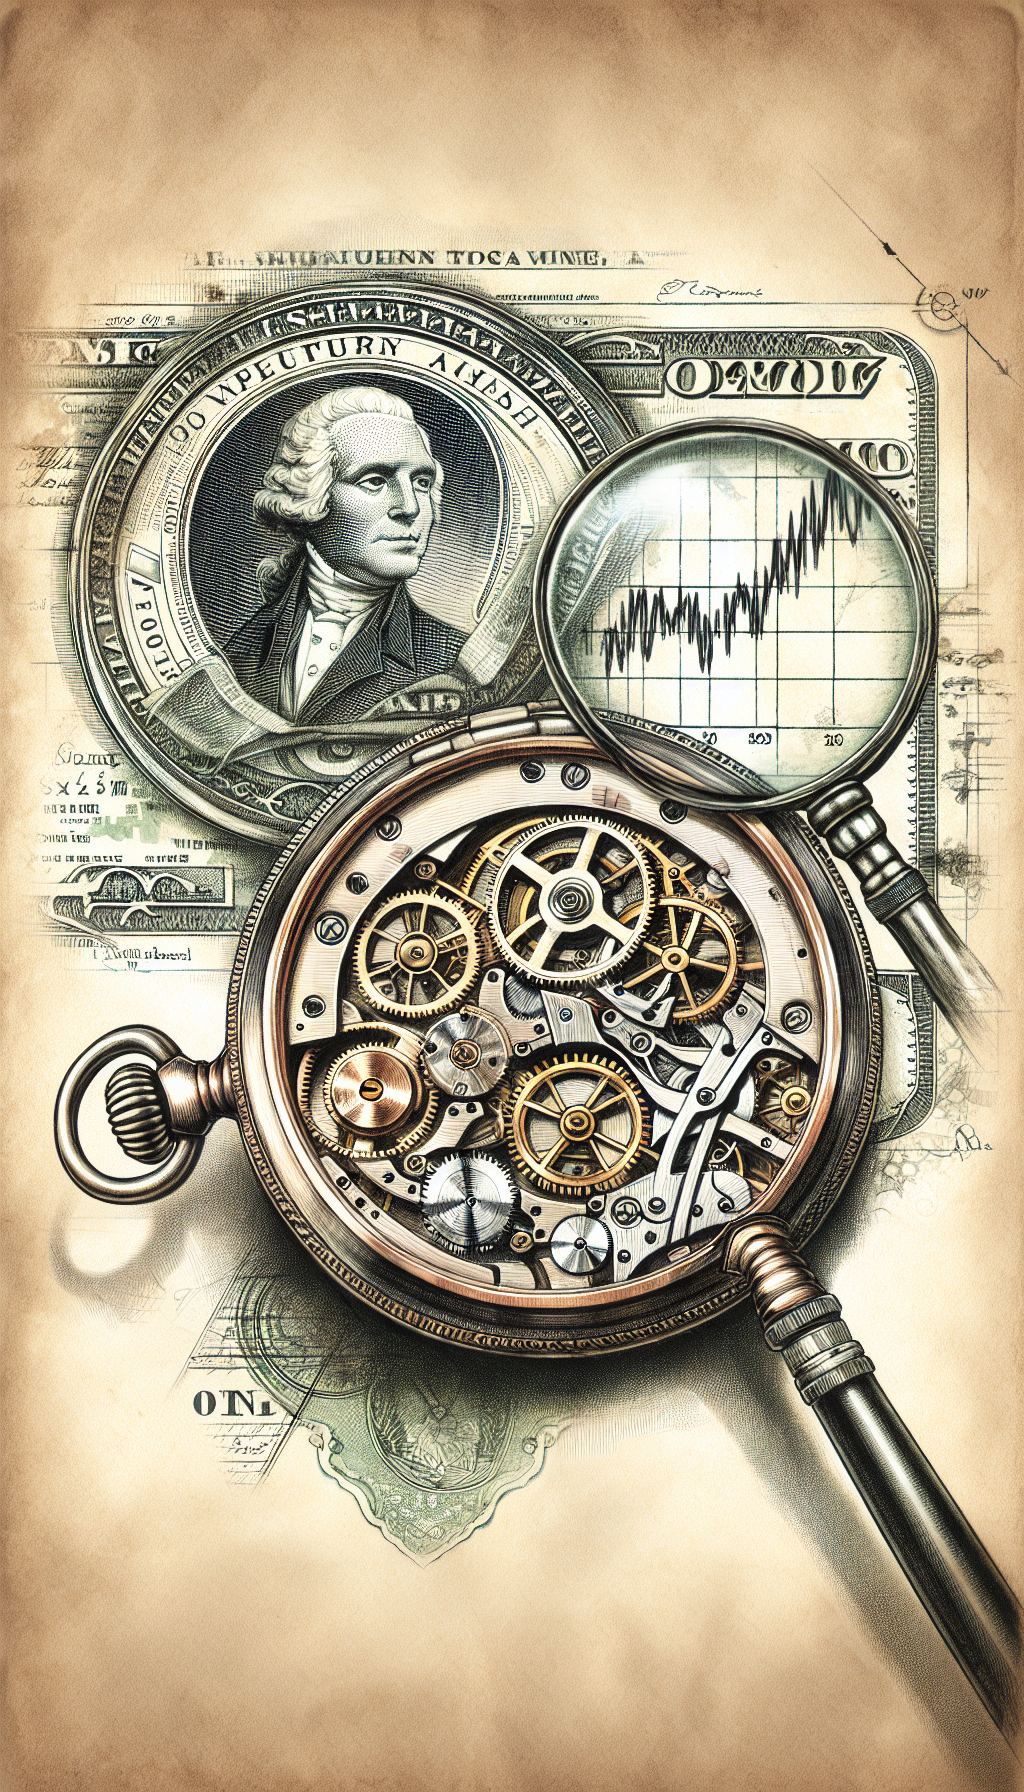 An antique pocket watch, meticulously opened to reveal its complex inner workings, is held under a magnifying glass, highlighting key factors like craftsmanship and gears. A subtle watermark in currency motif fills the background, and a faded chart with upward arrows implies increasing value. The illustration contrasts detailed sketch lines with vibrant watercolor hues, capturing both technical detail and the watch's vintage allure.